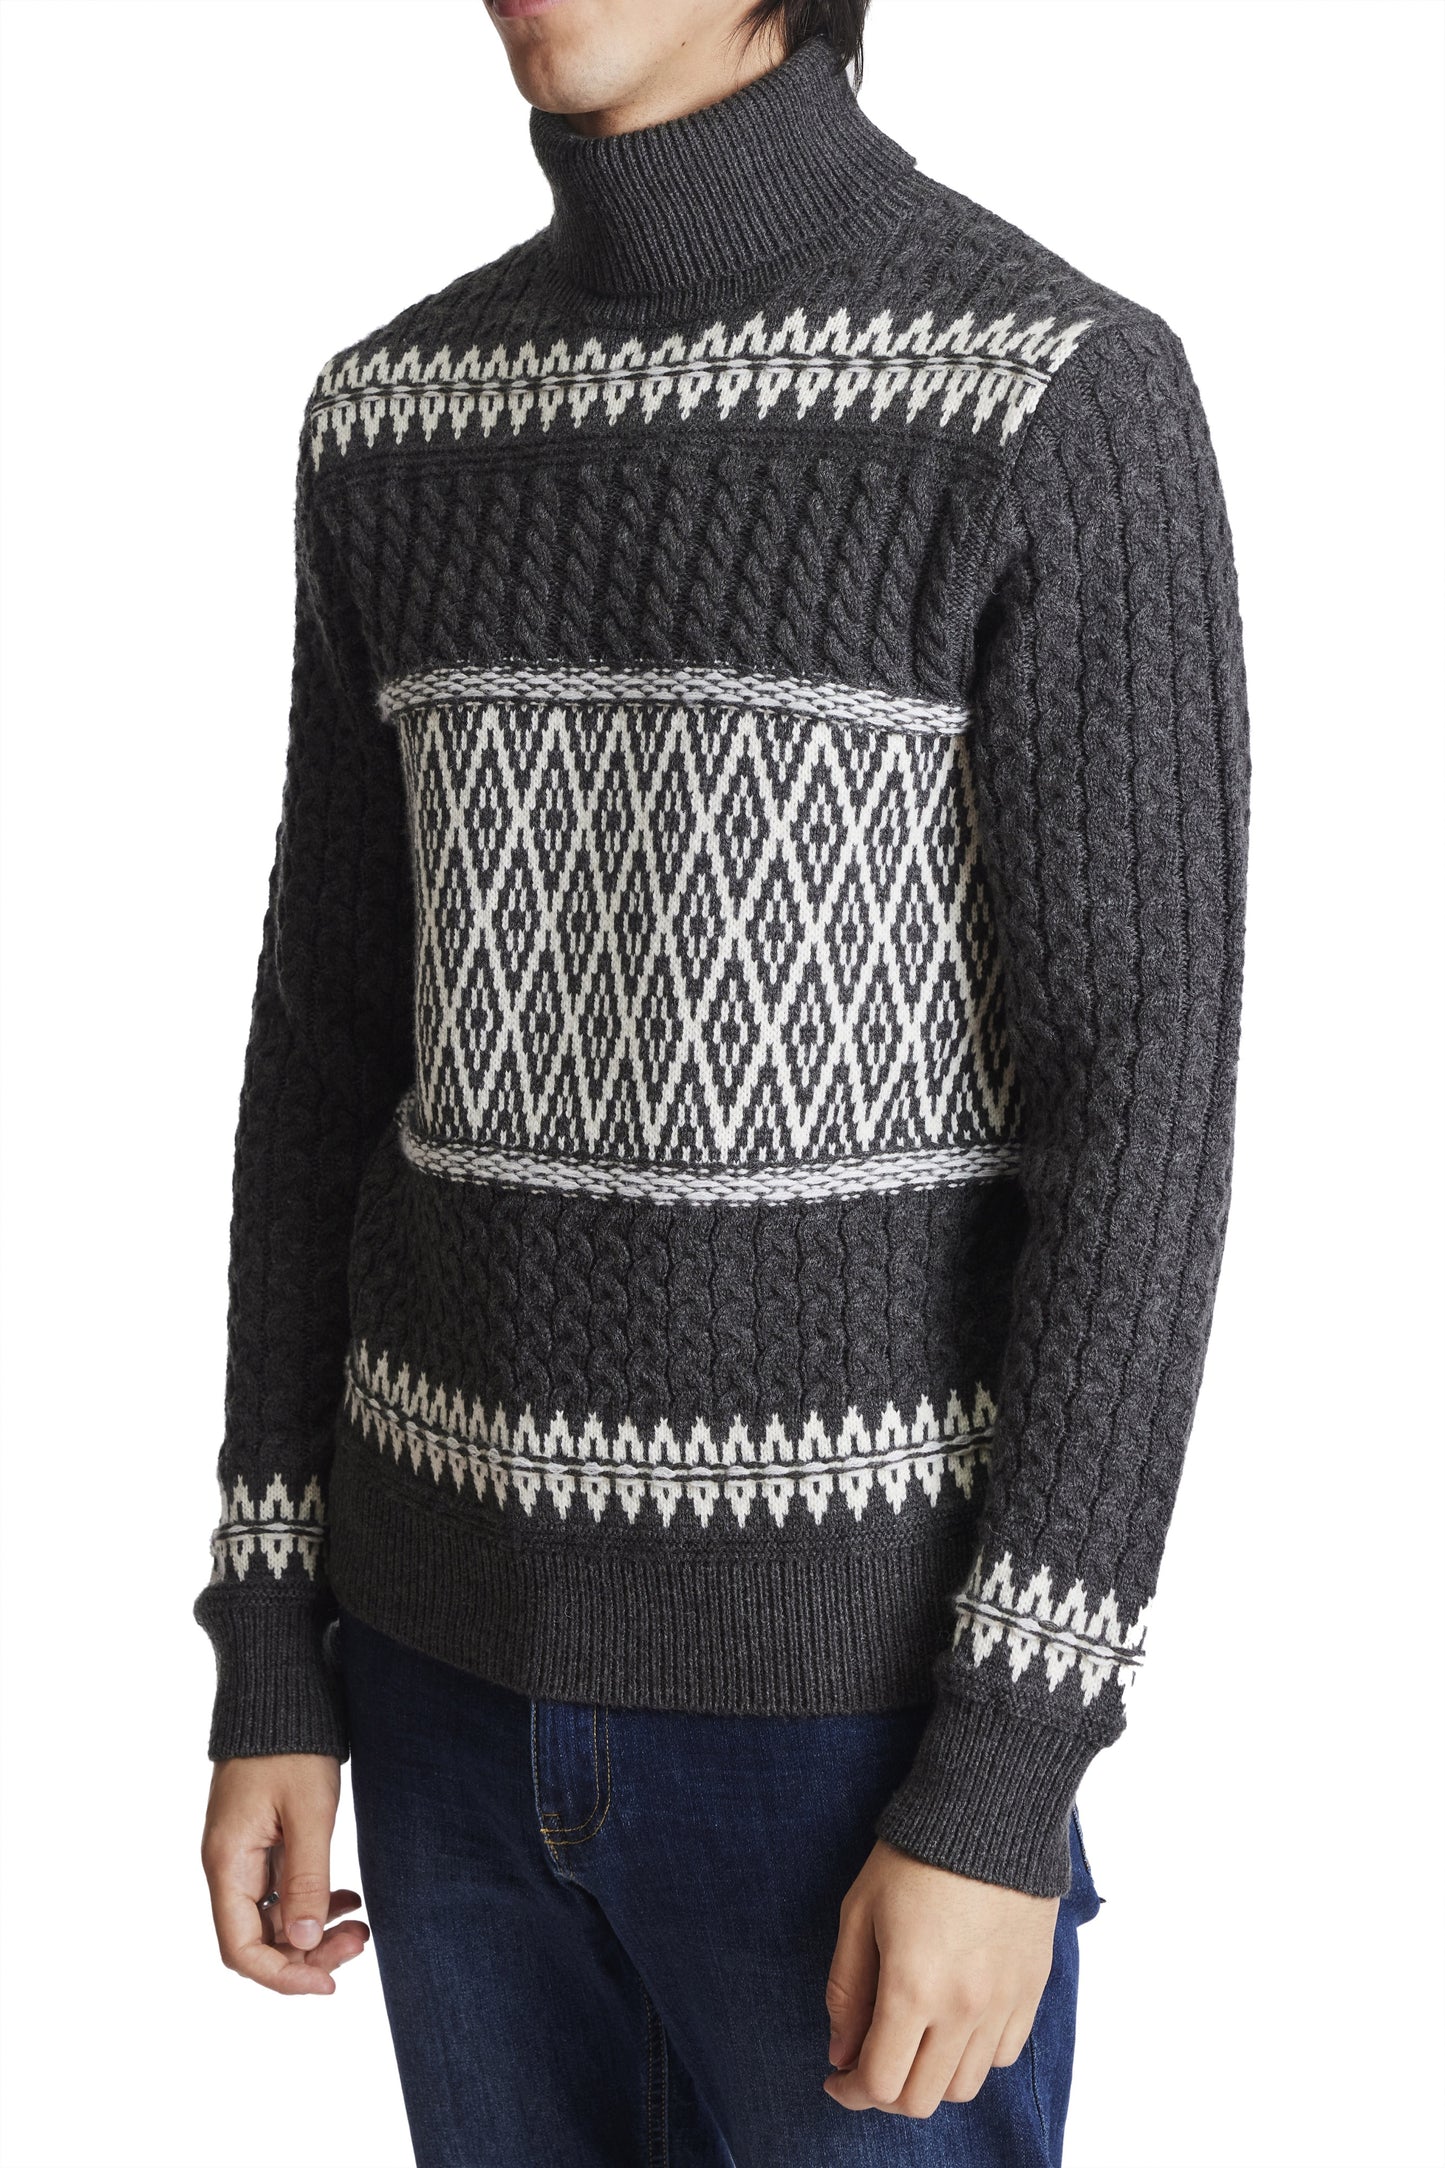 Paisely & Gray Charcoal White Turtleneck Sweater